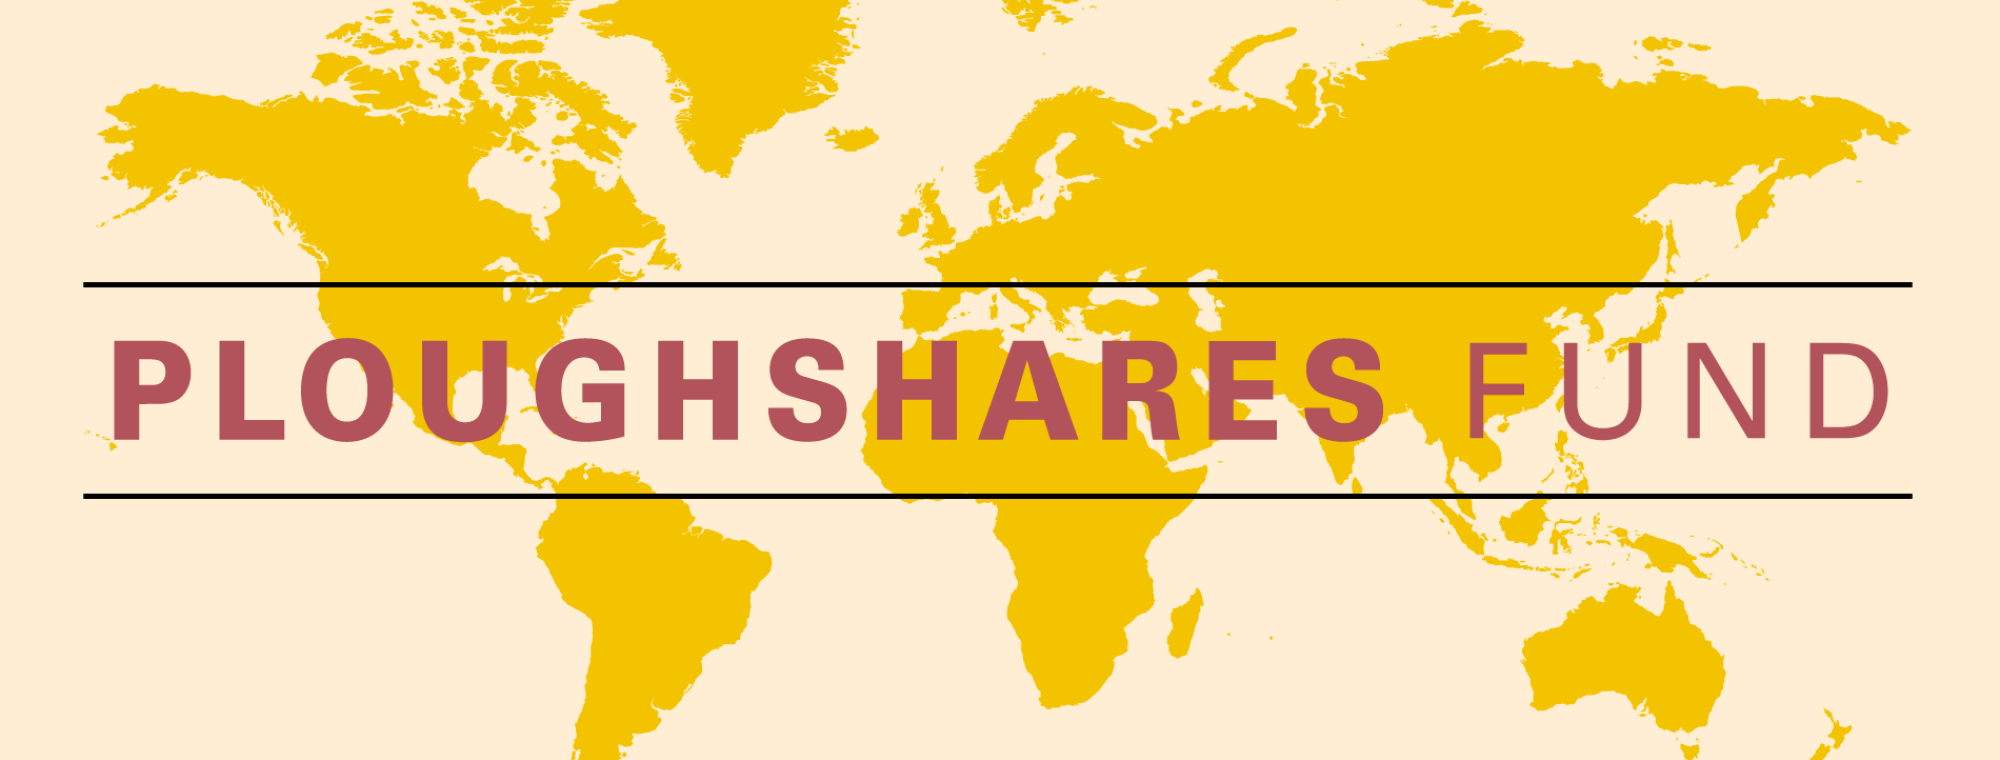 Ploughshares Fund Logo over world map